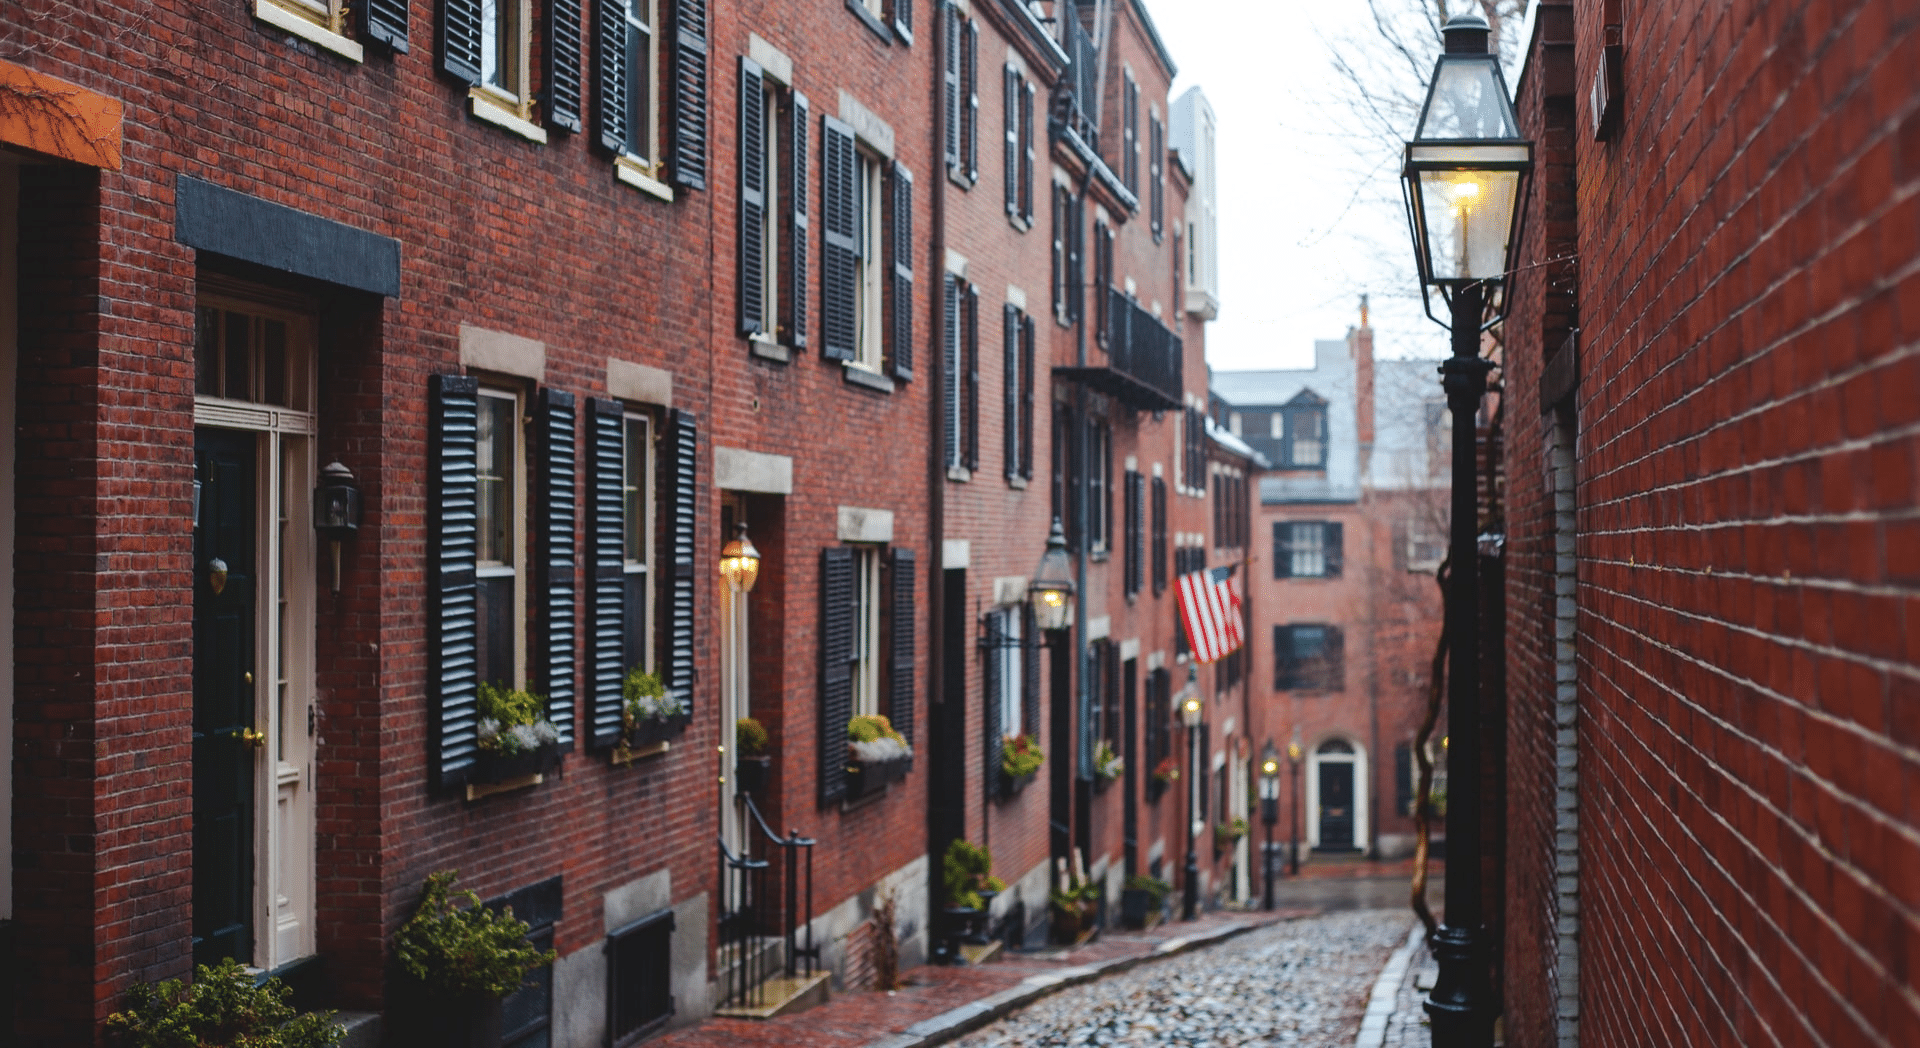 Our conversation will cover more than just customer loyalty, and provide a wider view compared to Acorn Street in Boston.